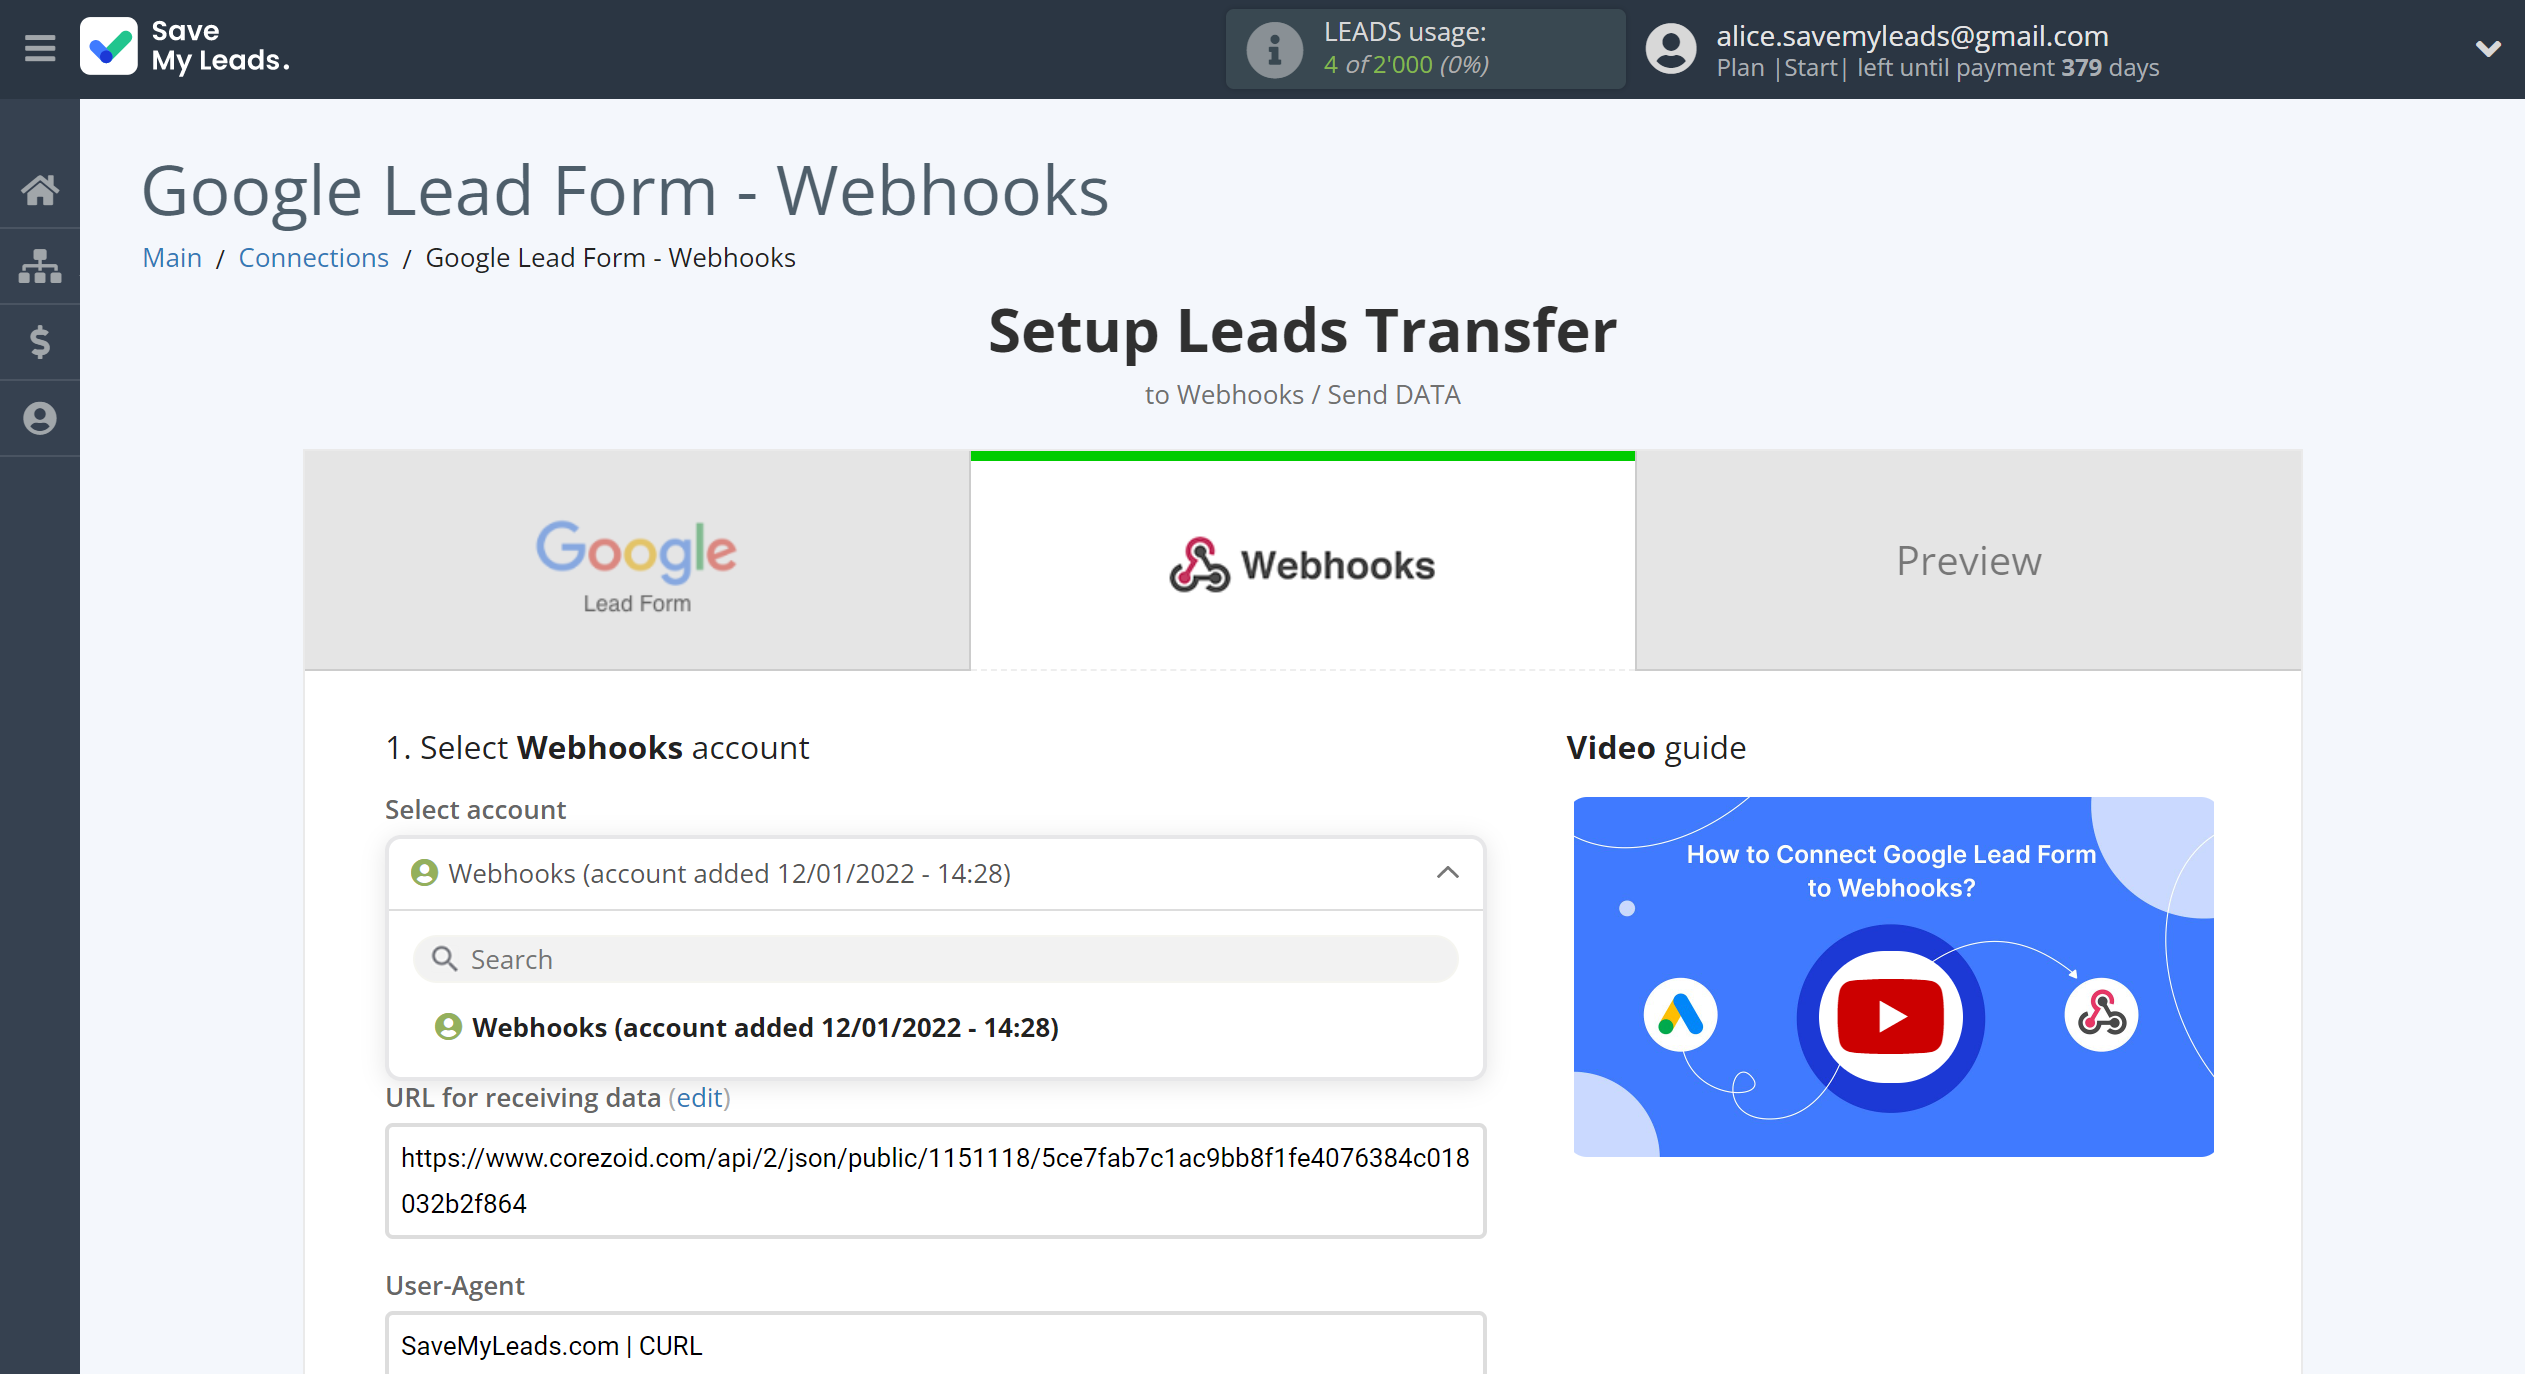 How to Connect Google Lead Form with Webhooks | Data Destination account selection